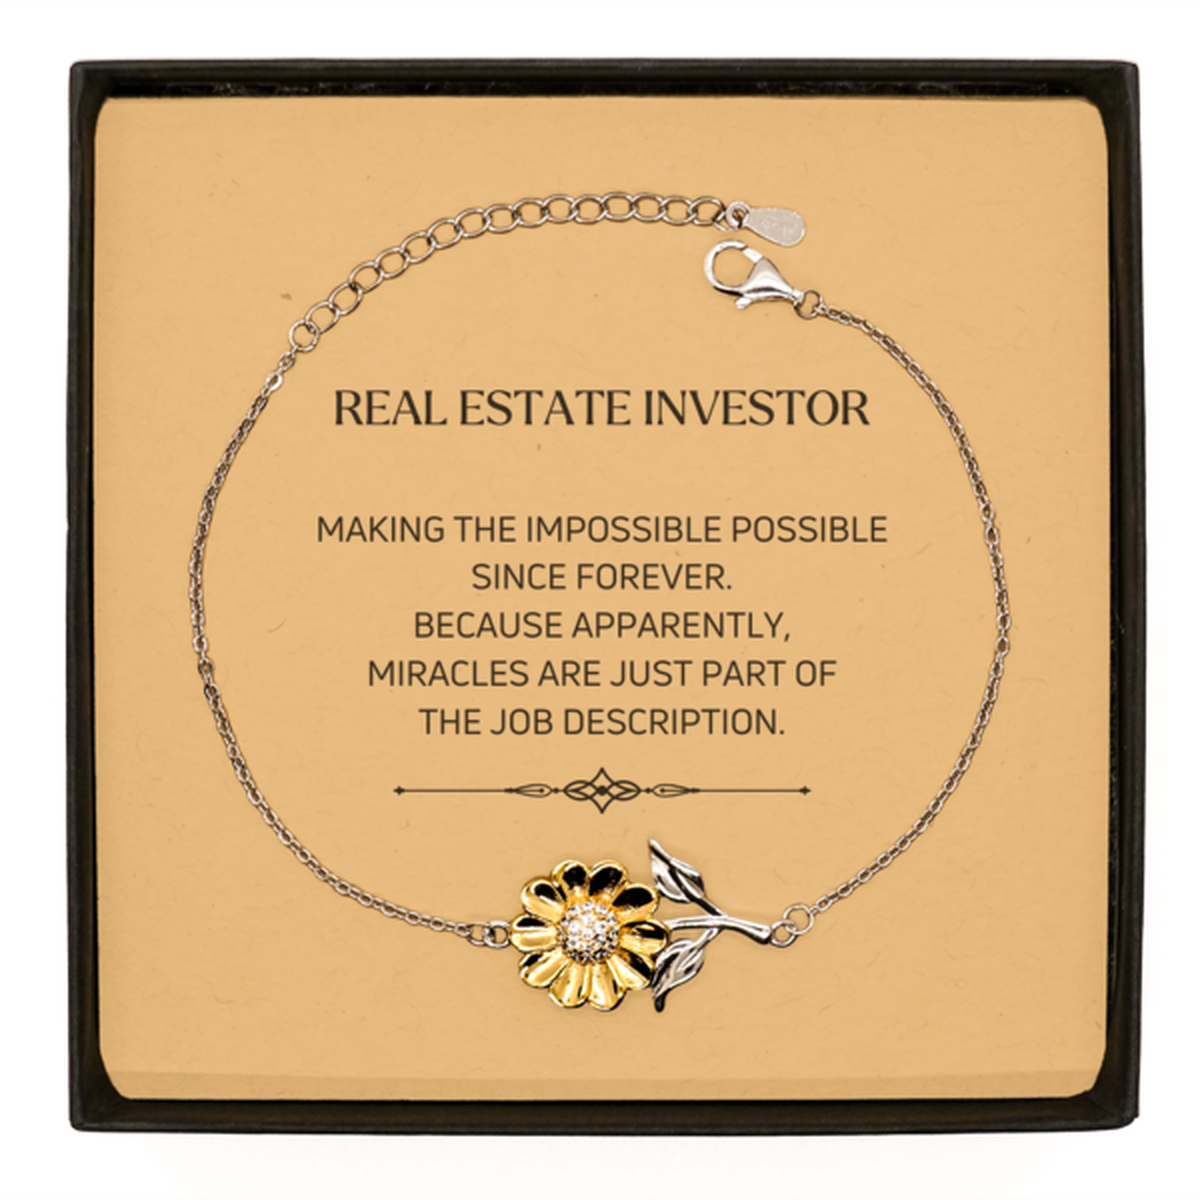 Funny Real Estate Investor Gifts, Miracles are just part of the job description, Inspirational Birthday Sunflower Bracelet For Real Estate Investor, Men, Women, Coworkers, Friends, Boss